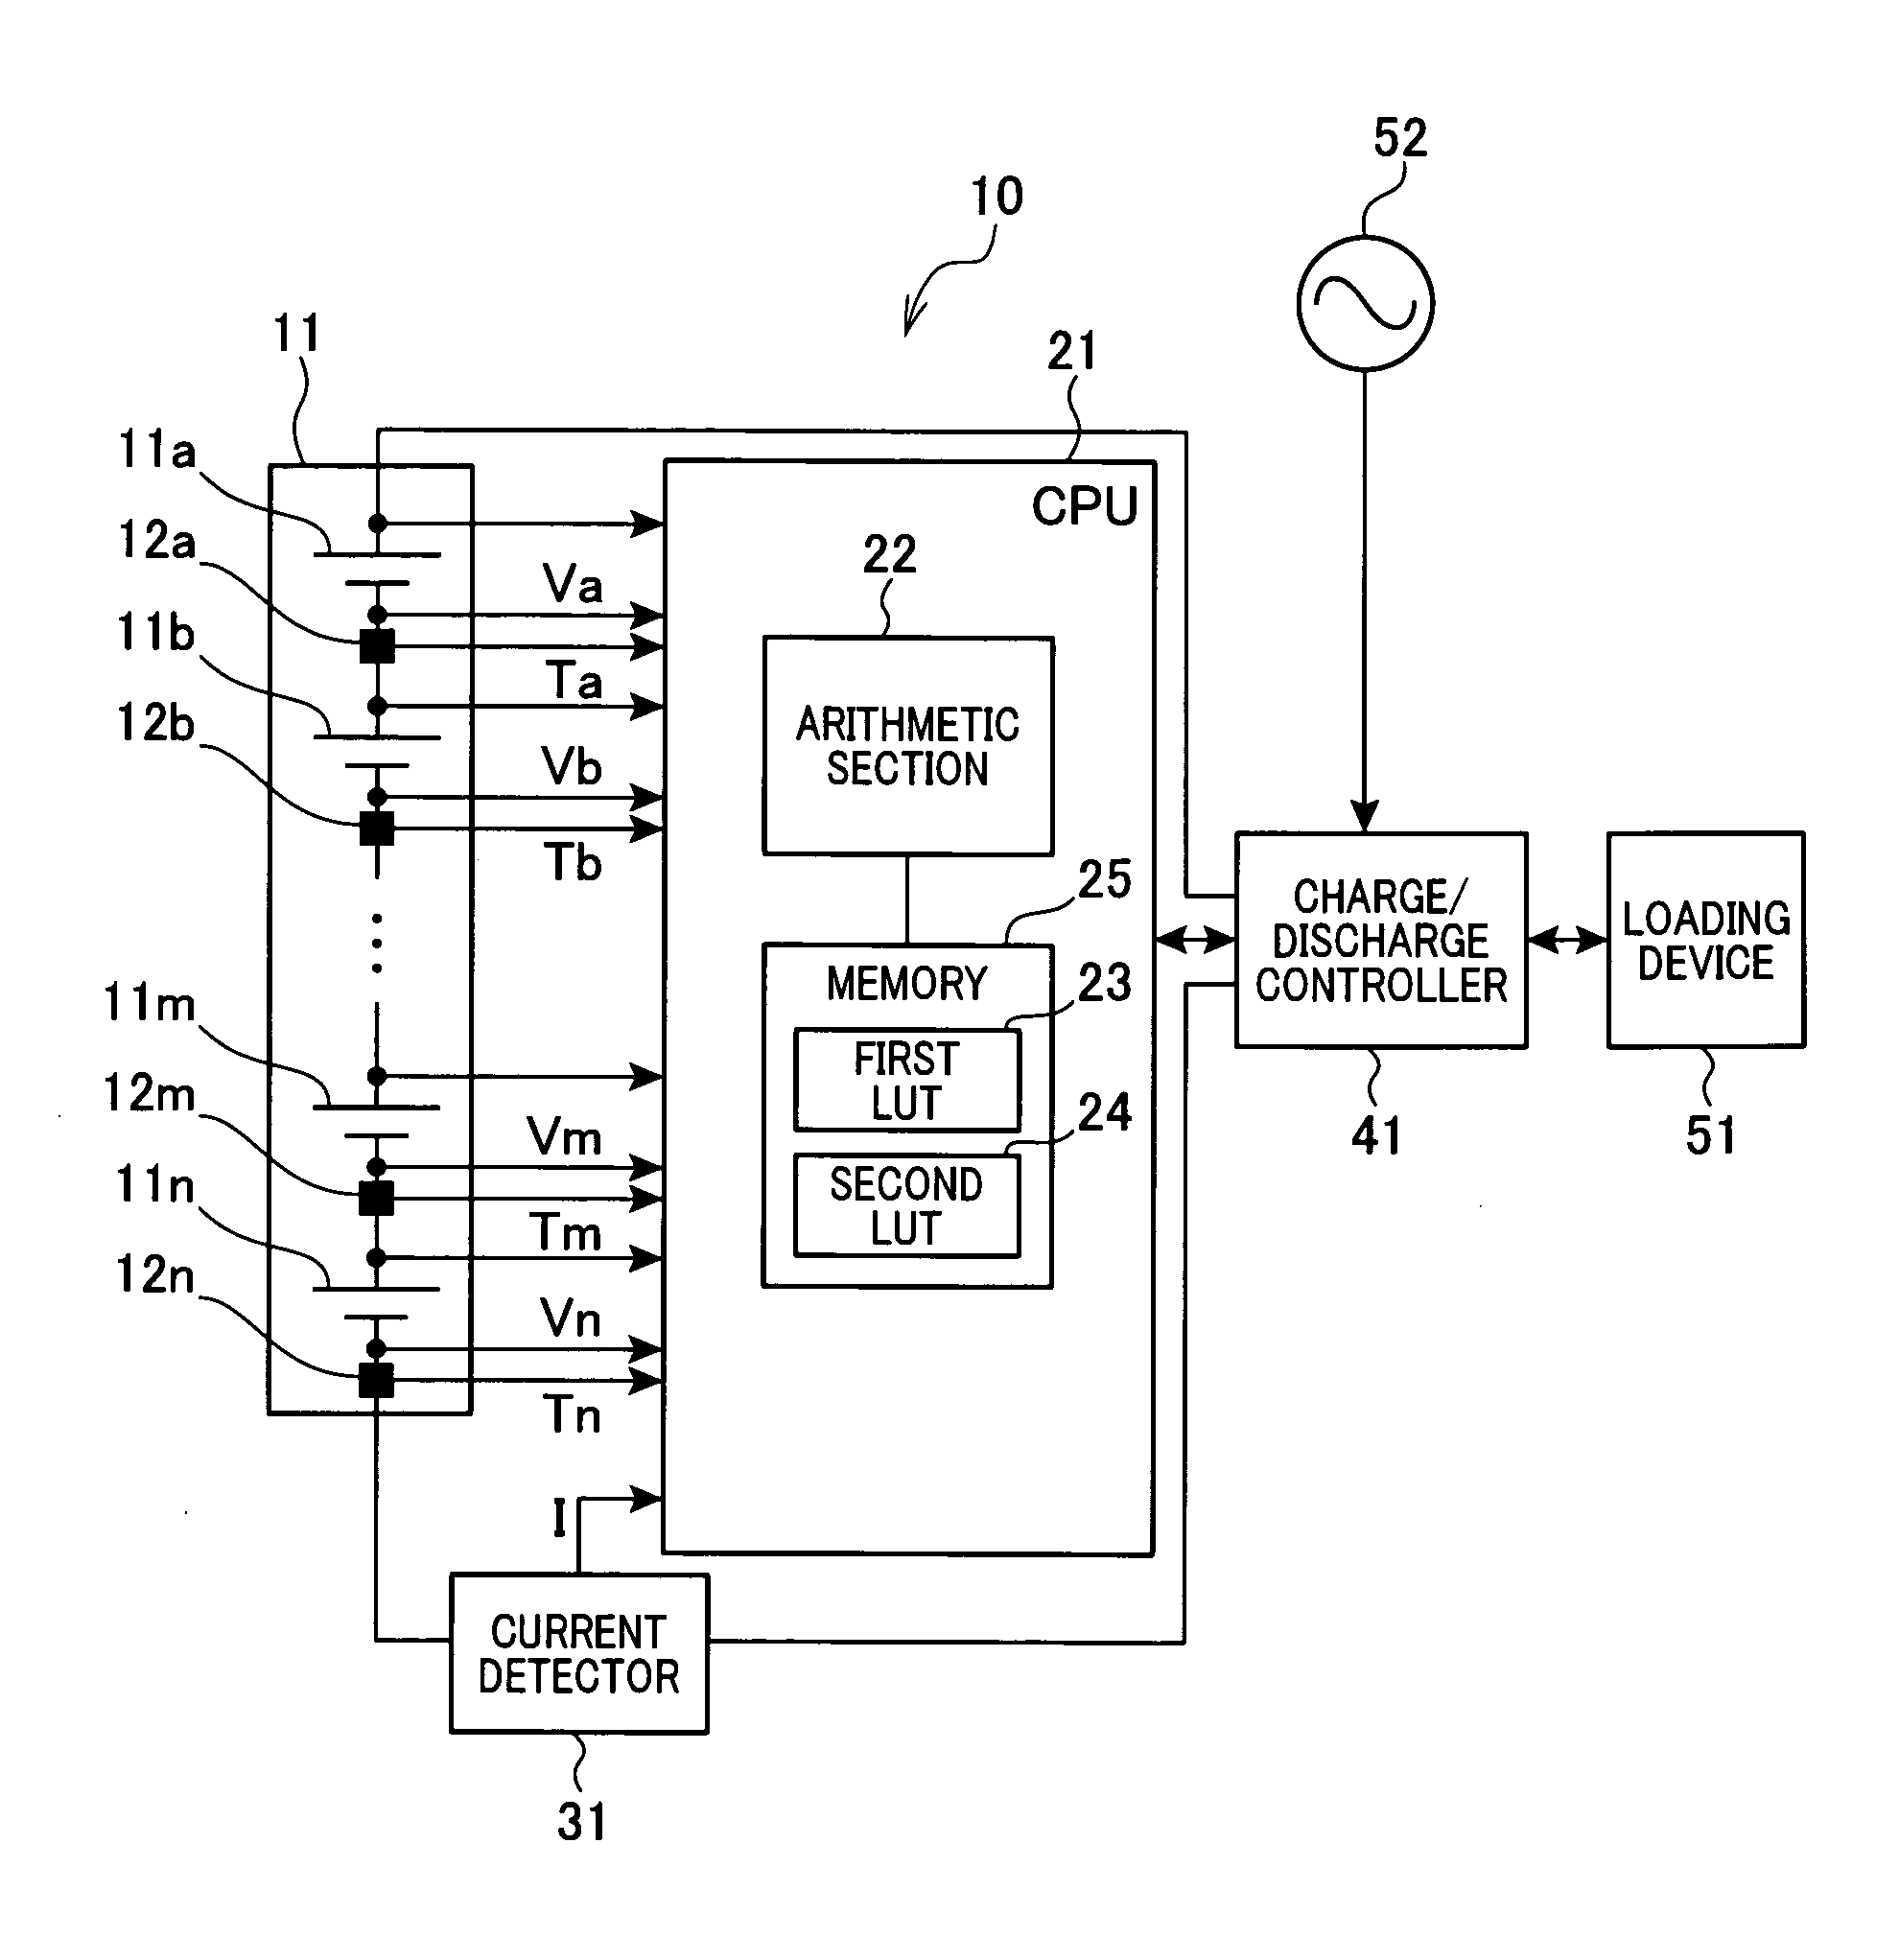 Apparatus for calculating residual capacity of secondary battery